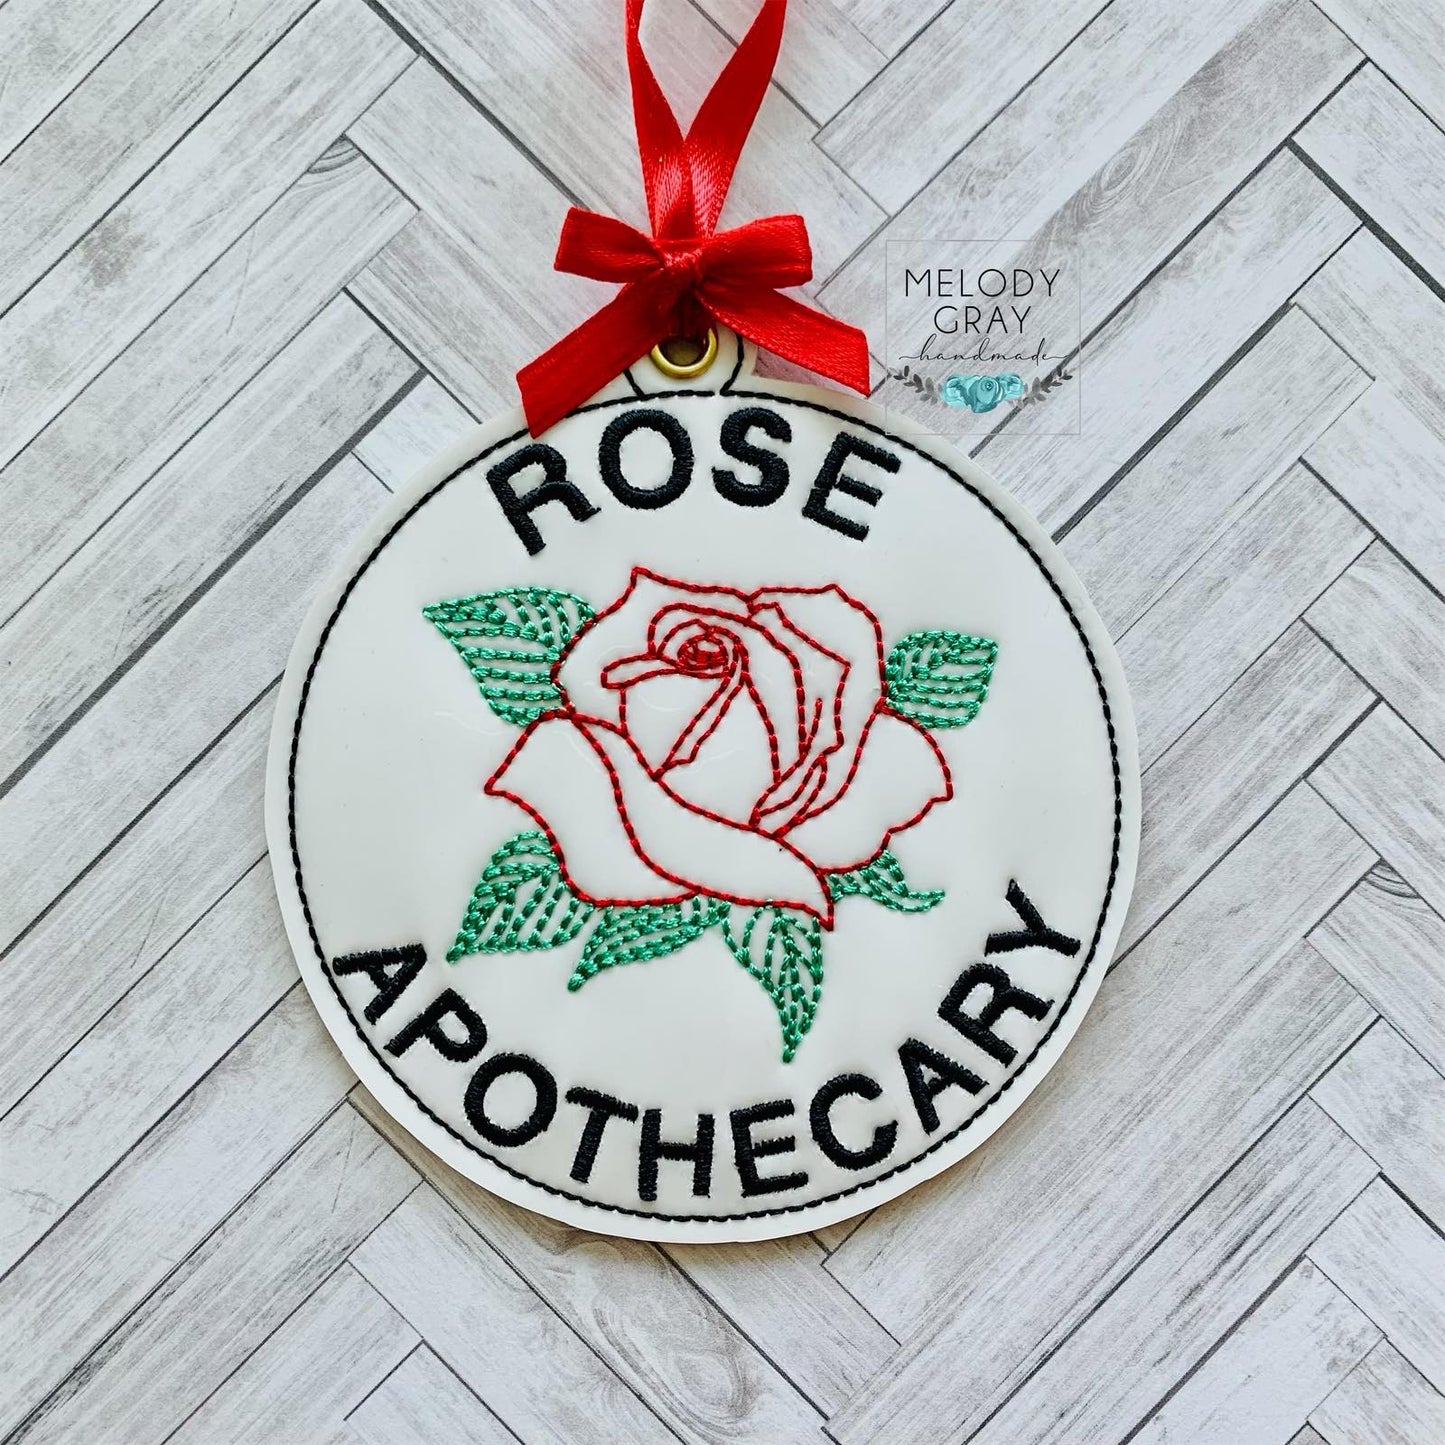 Rose Apothecary Ornament - Digital Embroidery Design